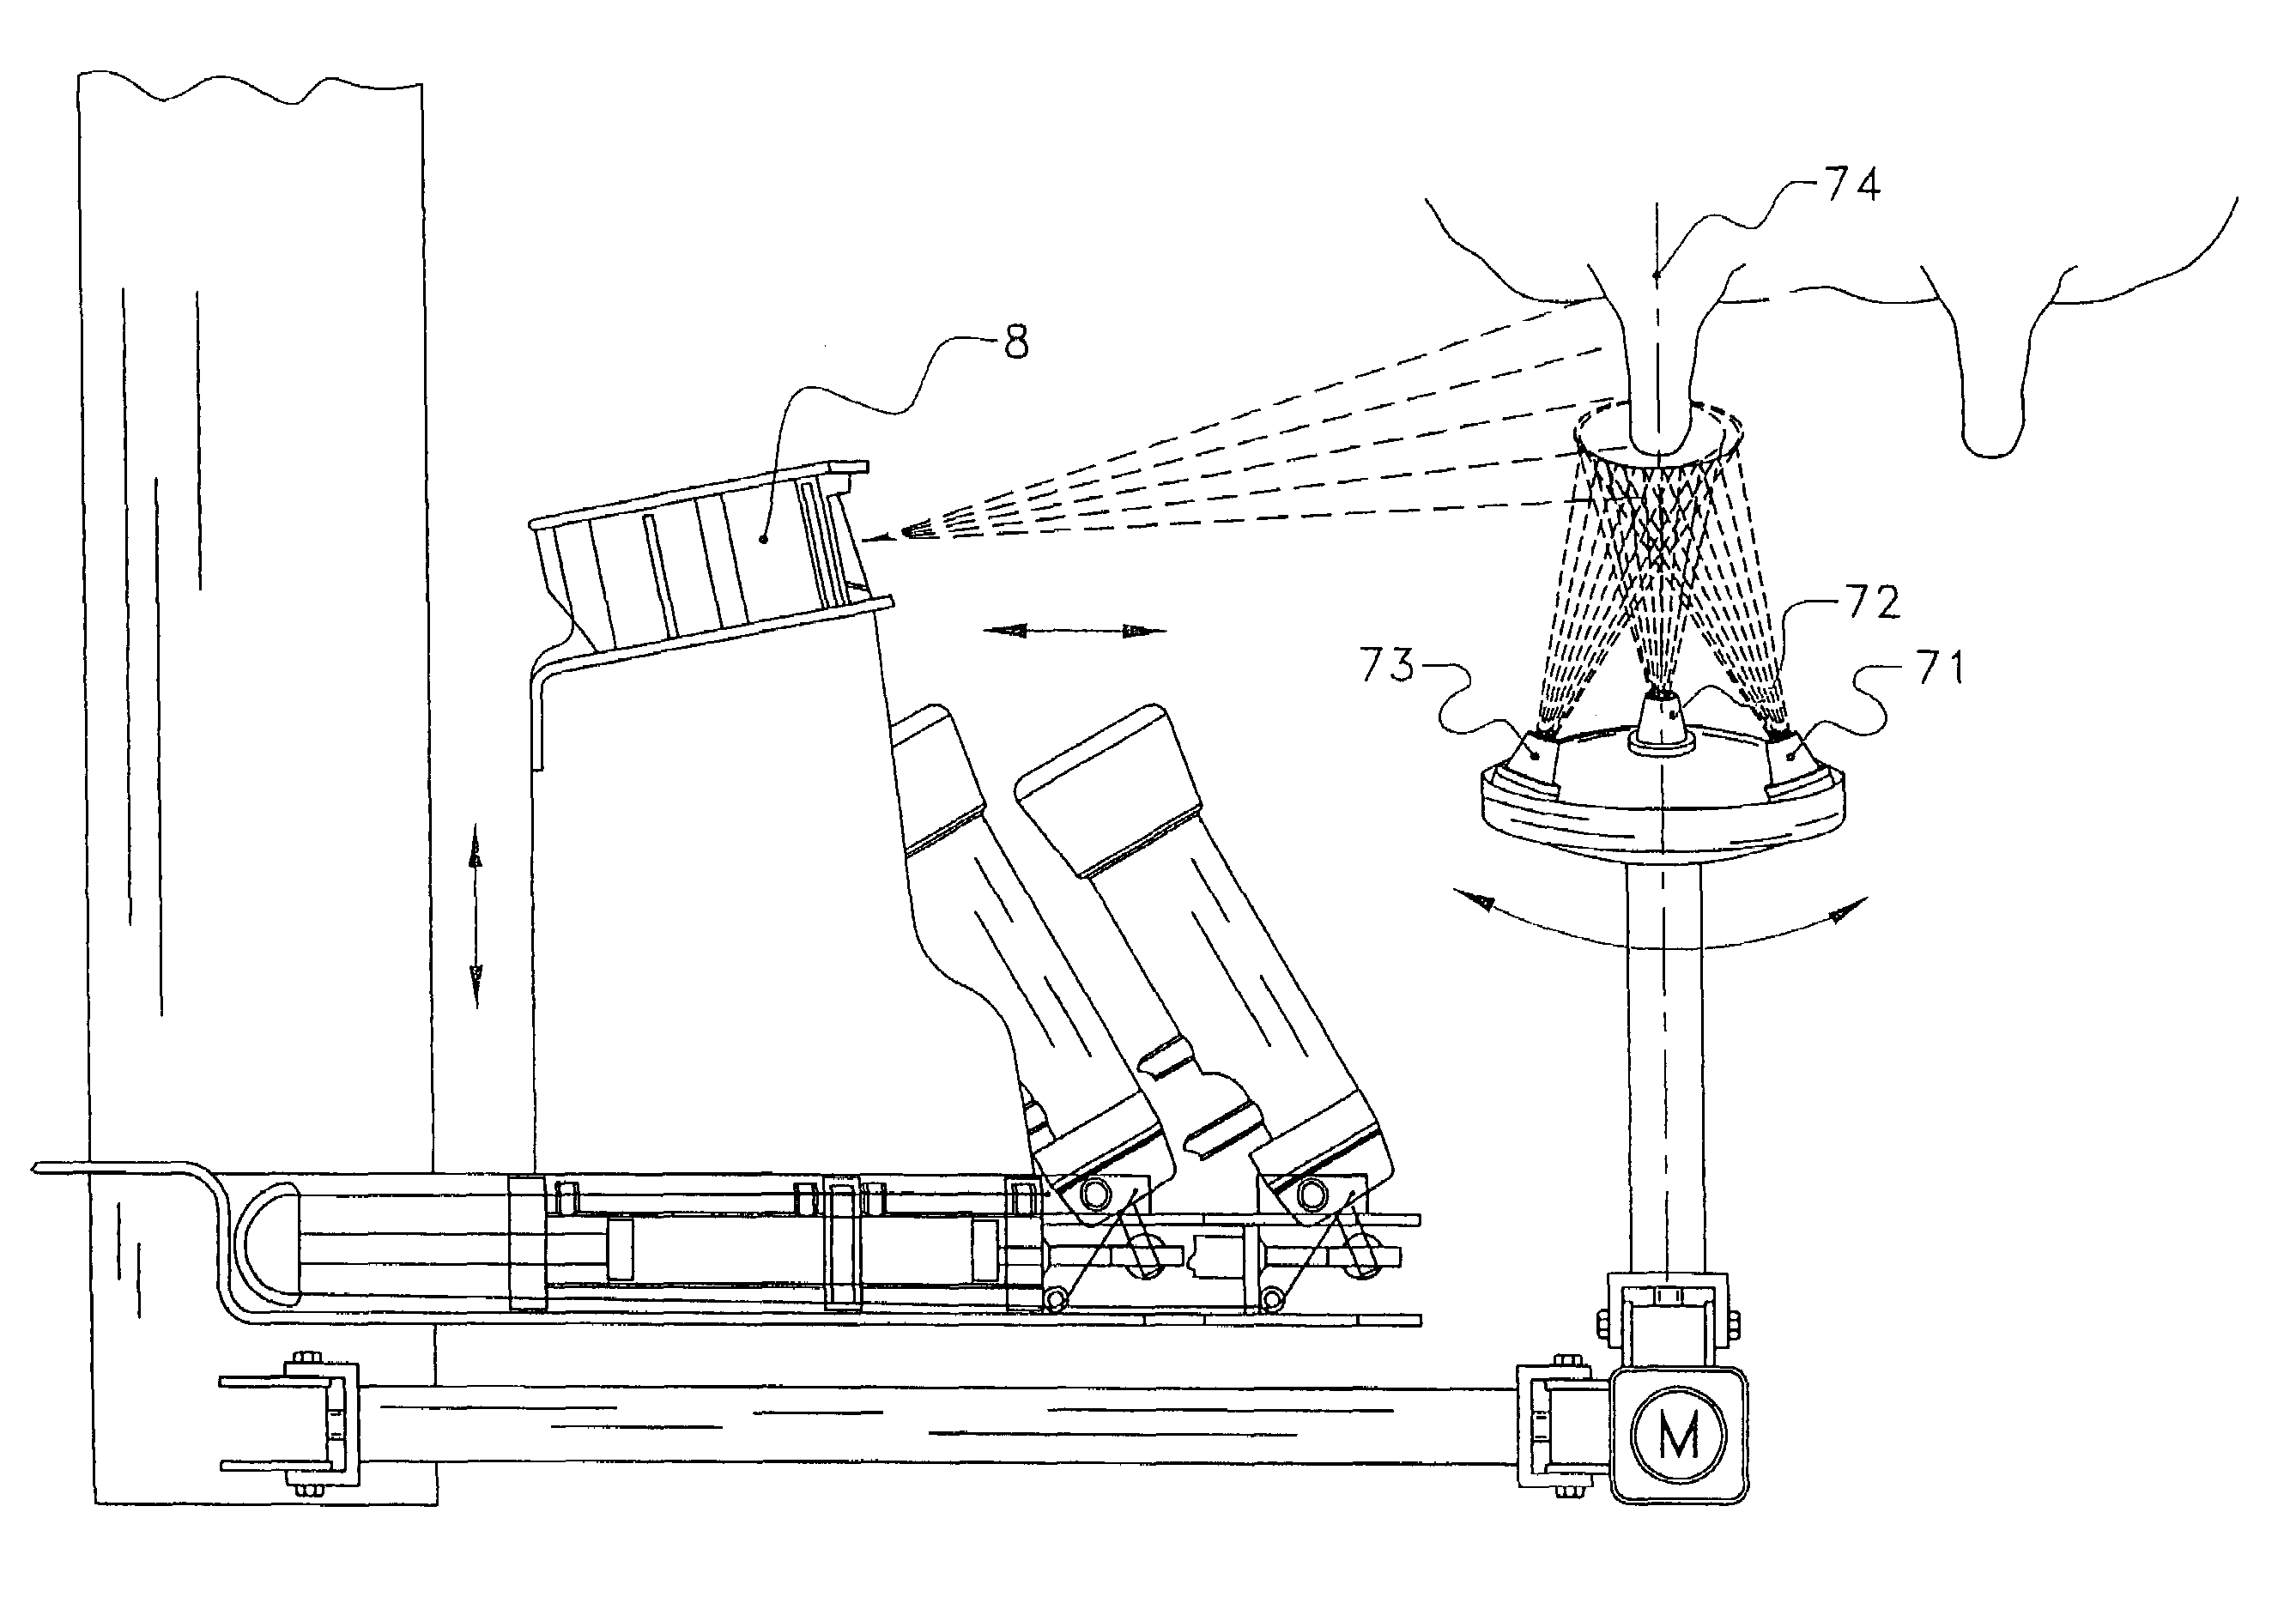 Fluid-applying device and a method of applying a fluid to a teat of a dairy animal